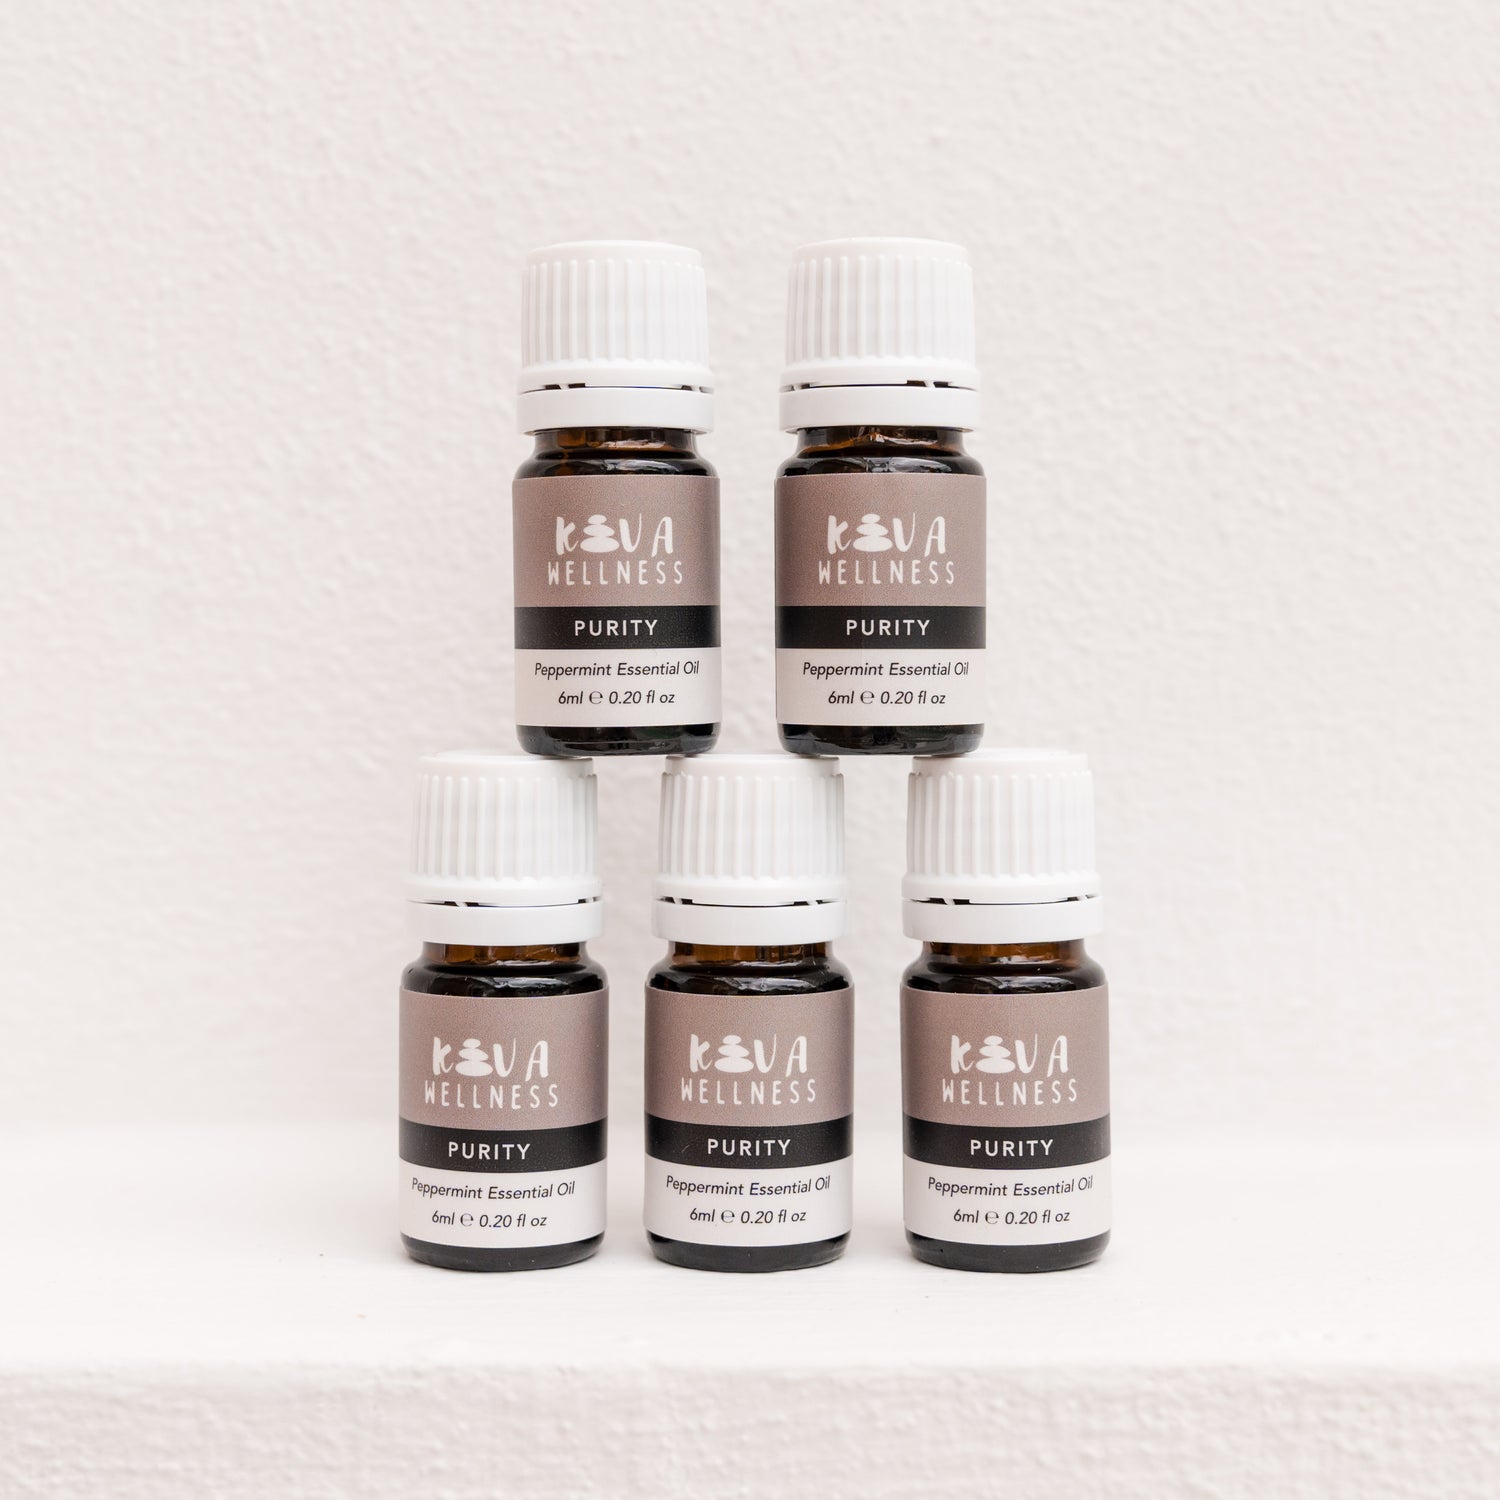 Purity Peppermint Essential Oil